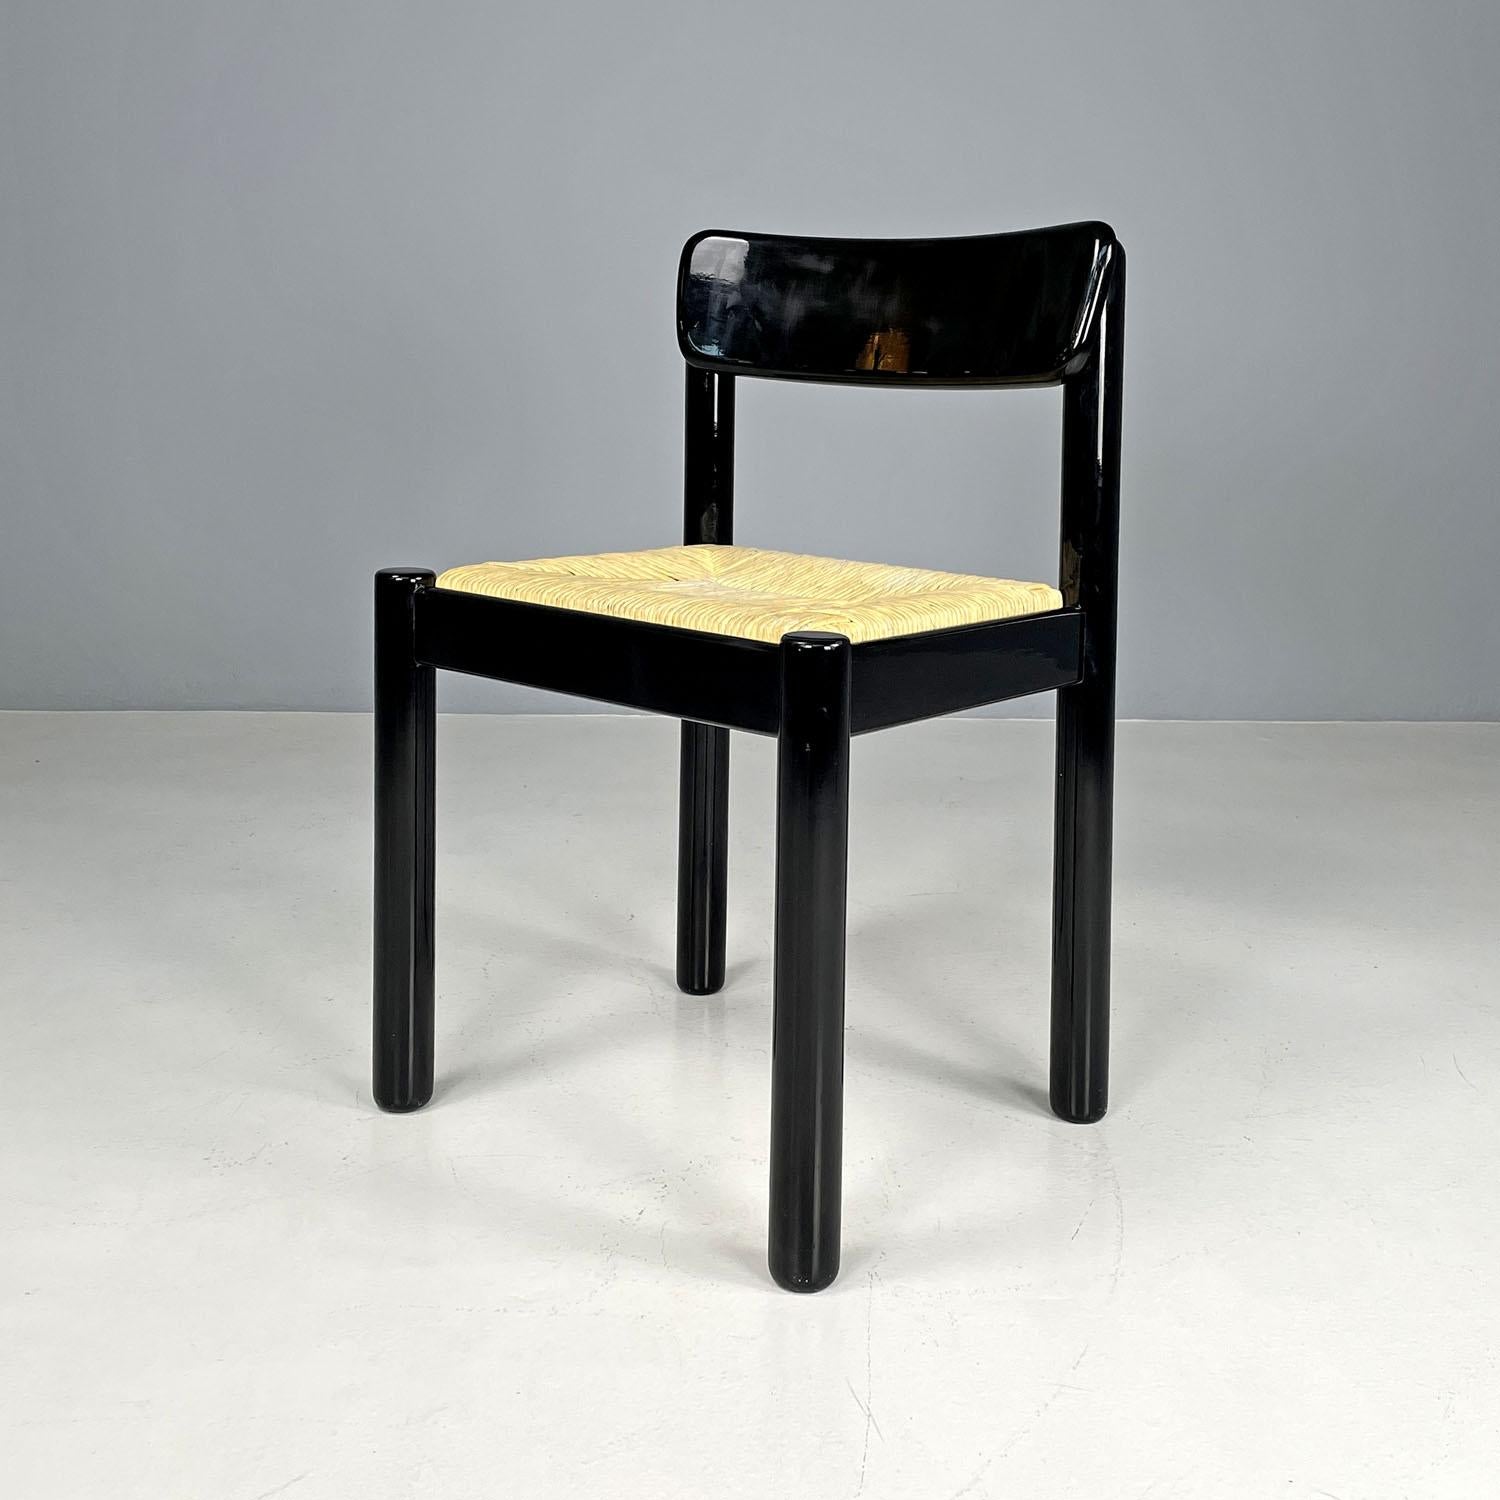 Italian modern straw and black wood chair, 1970s
Chair with rectangular base. The seat is in straw, the structure is in black lacquered wood with a glossy finish. The backrest has a curved and welcoming line. The four legs have a round